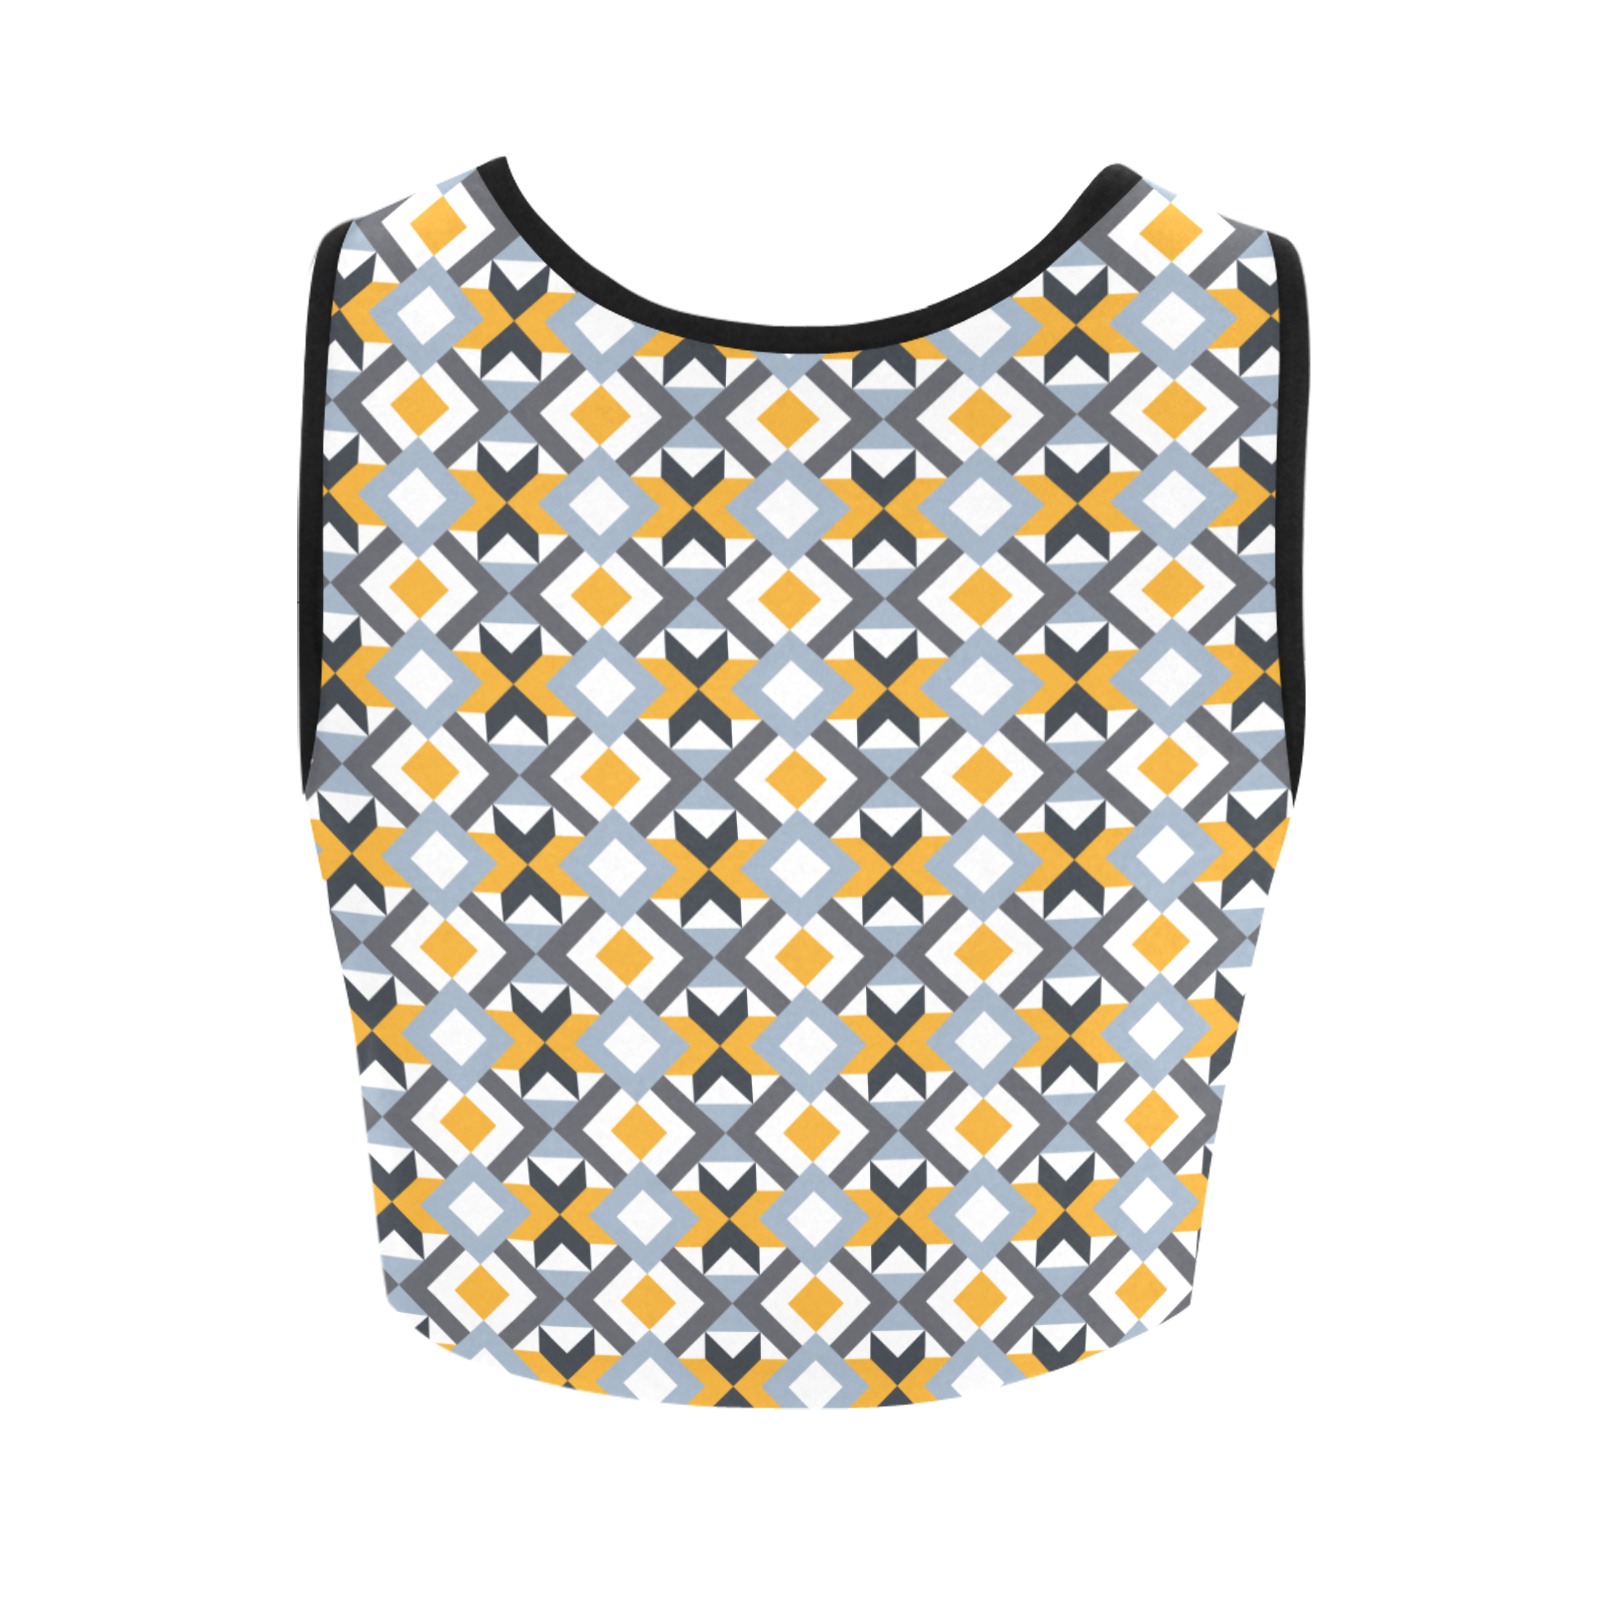 Retro Angles Abstract Geometric Pattern Women's Crop Top (Model T42)